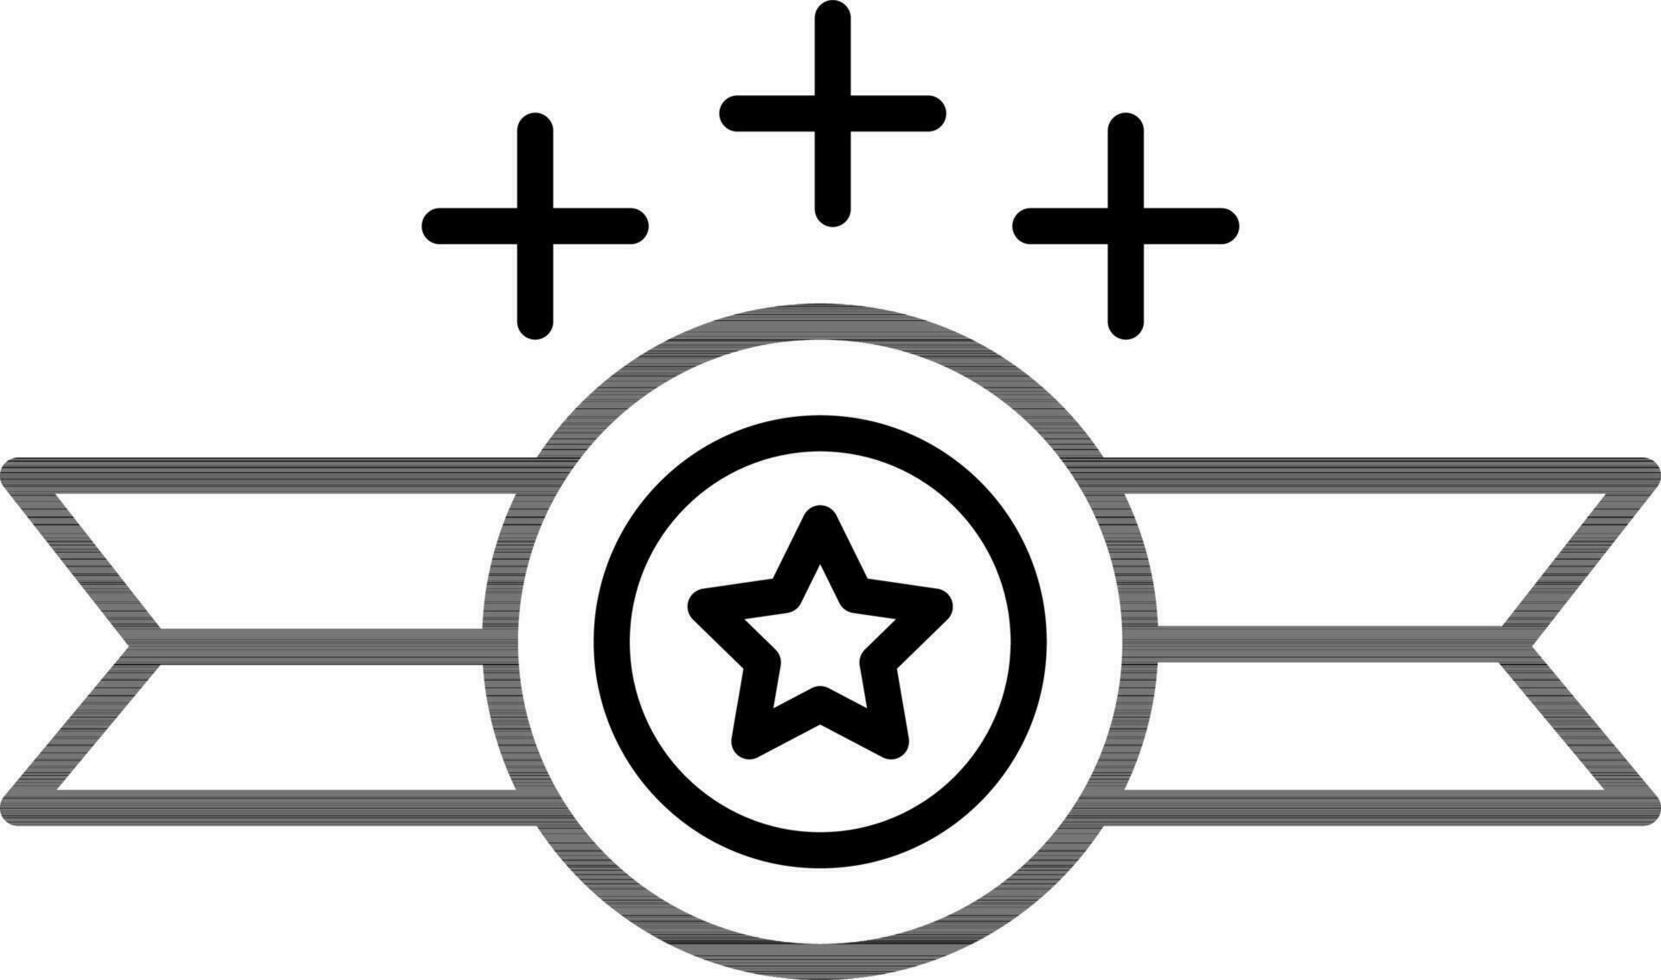 Star badge icon in thin line art. vector